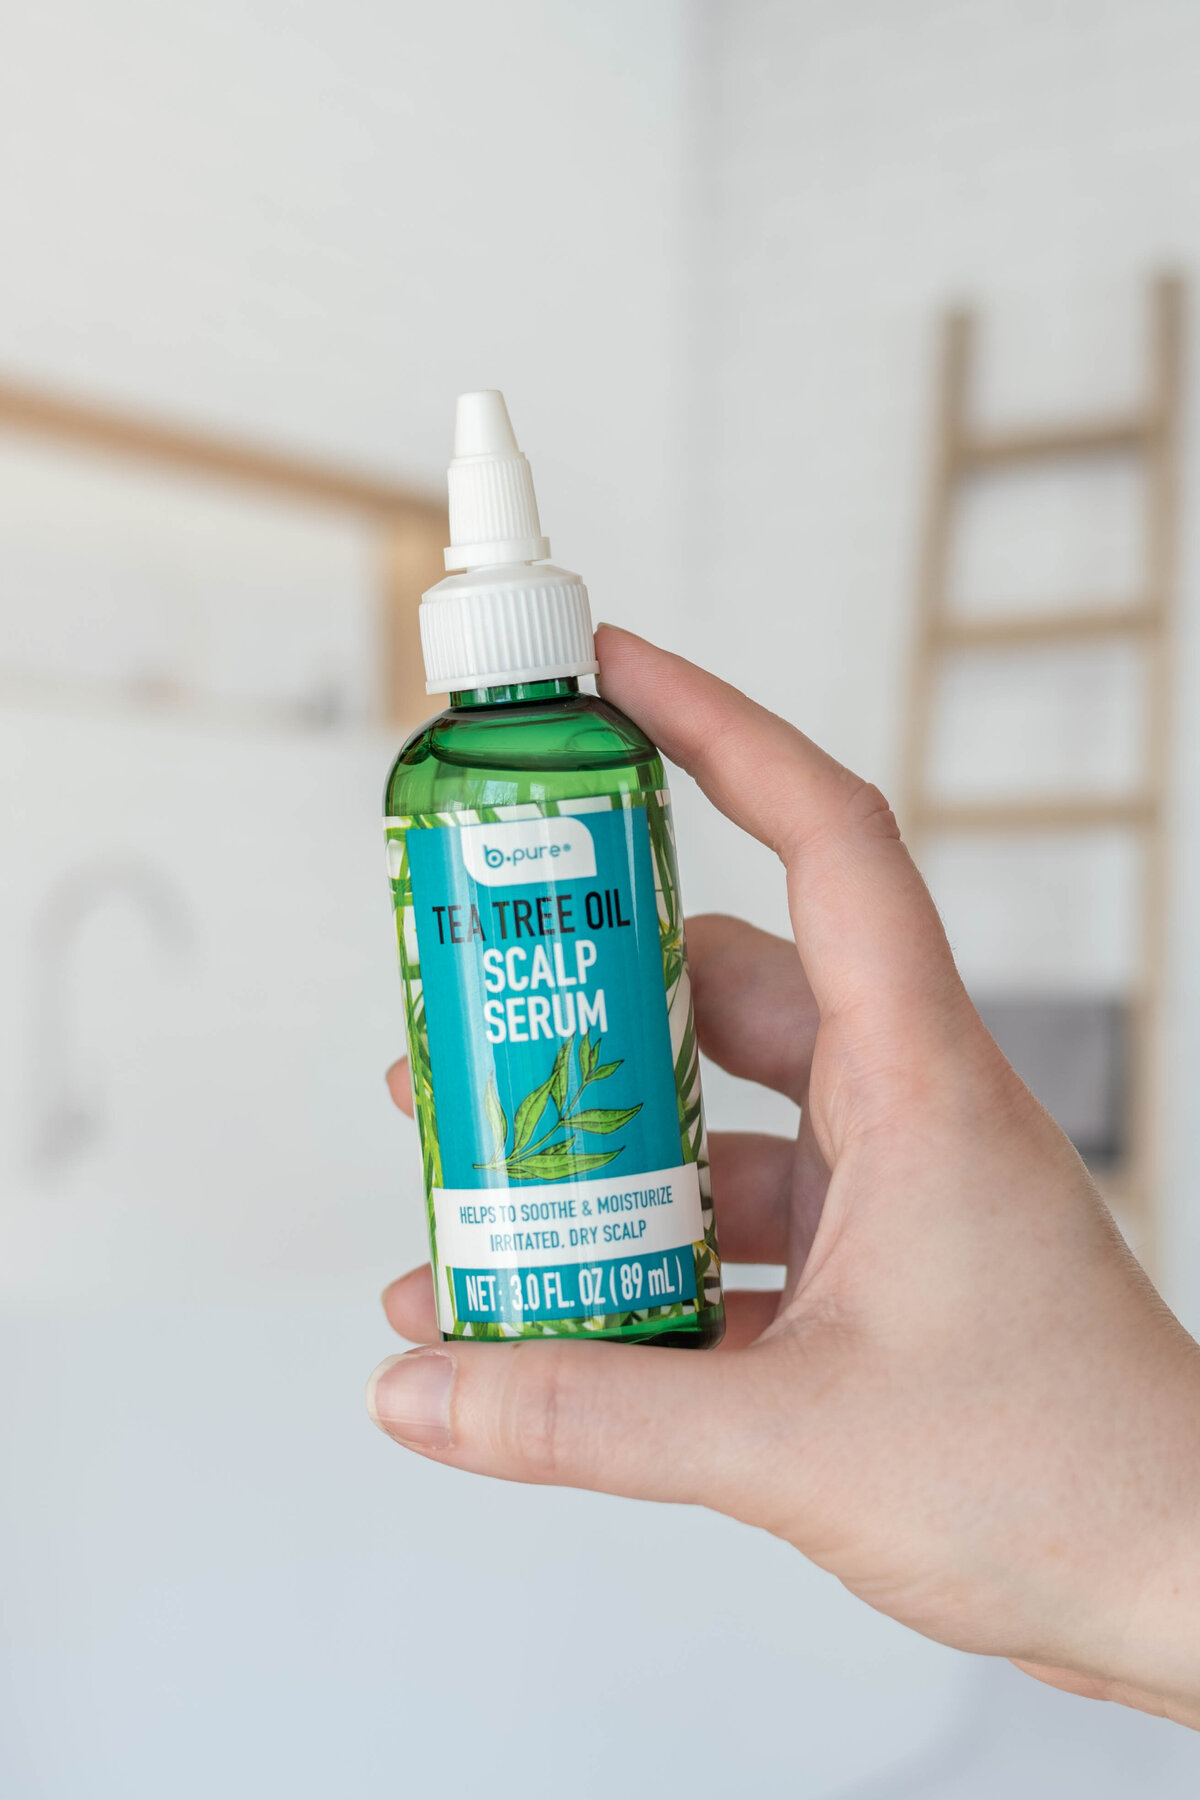 A person holding a bottle of be-pure tea tree oil scalp serum in a bright, airy room.